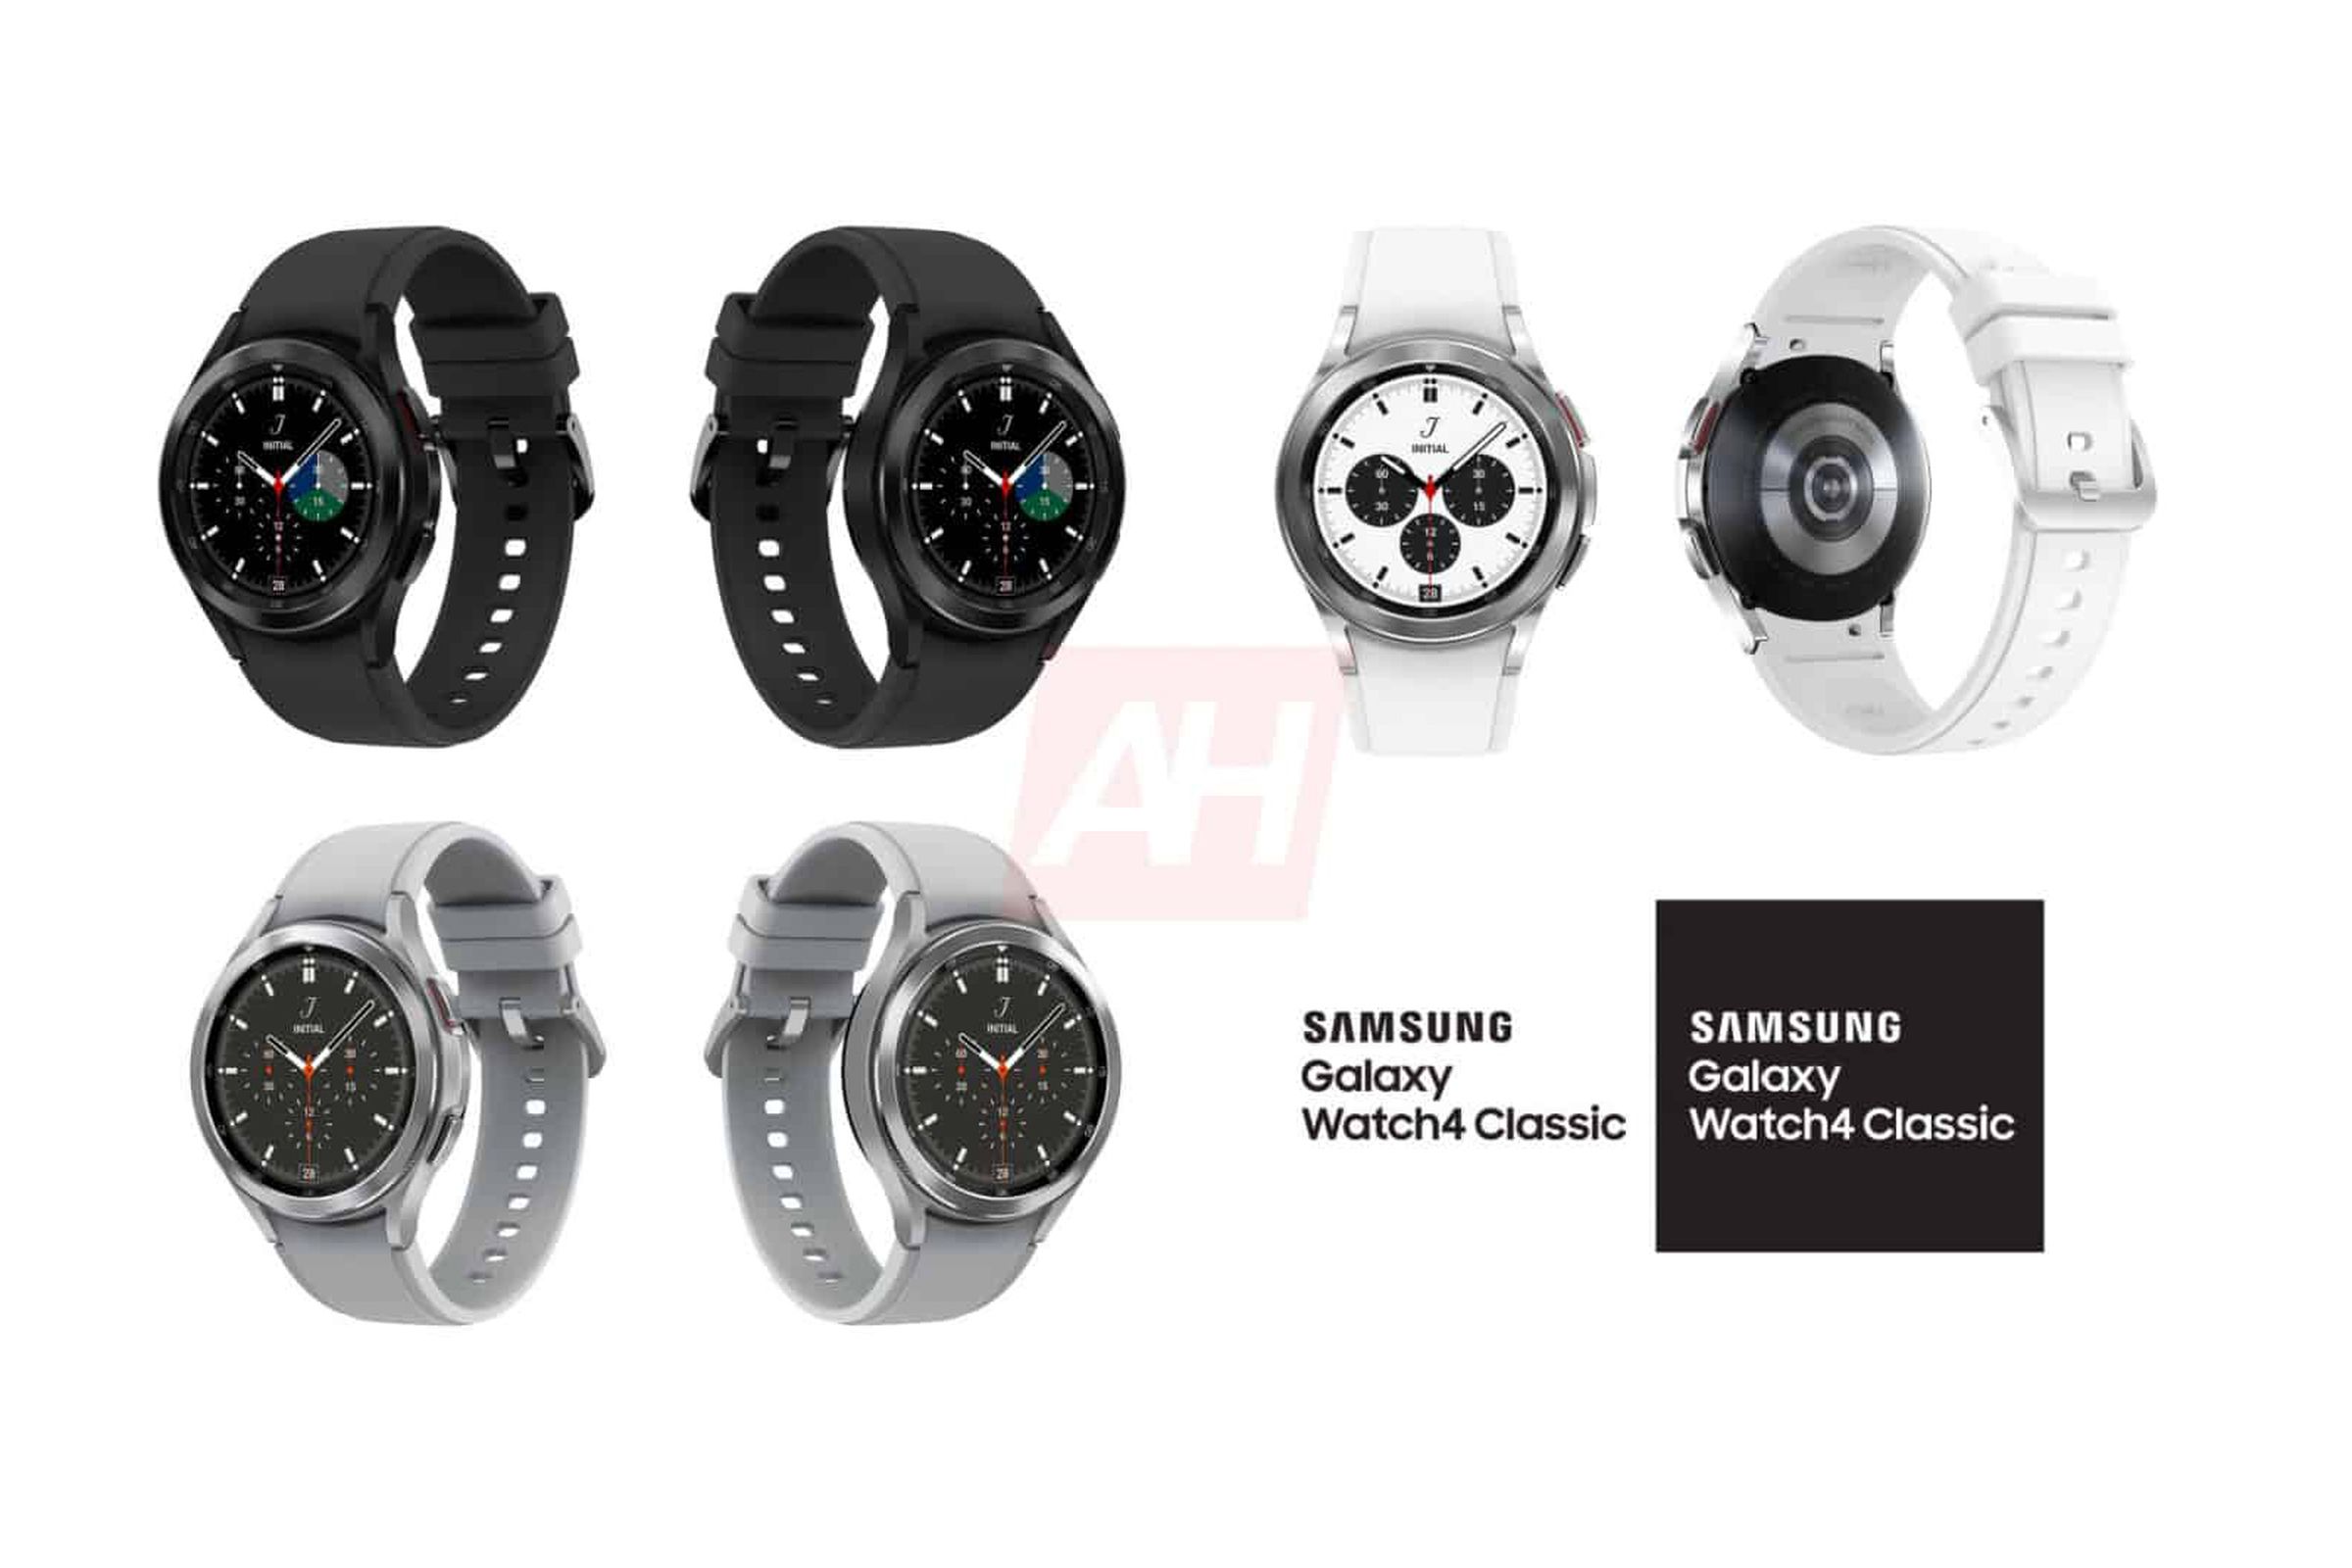 Rumored Galaxy Watches